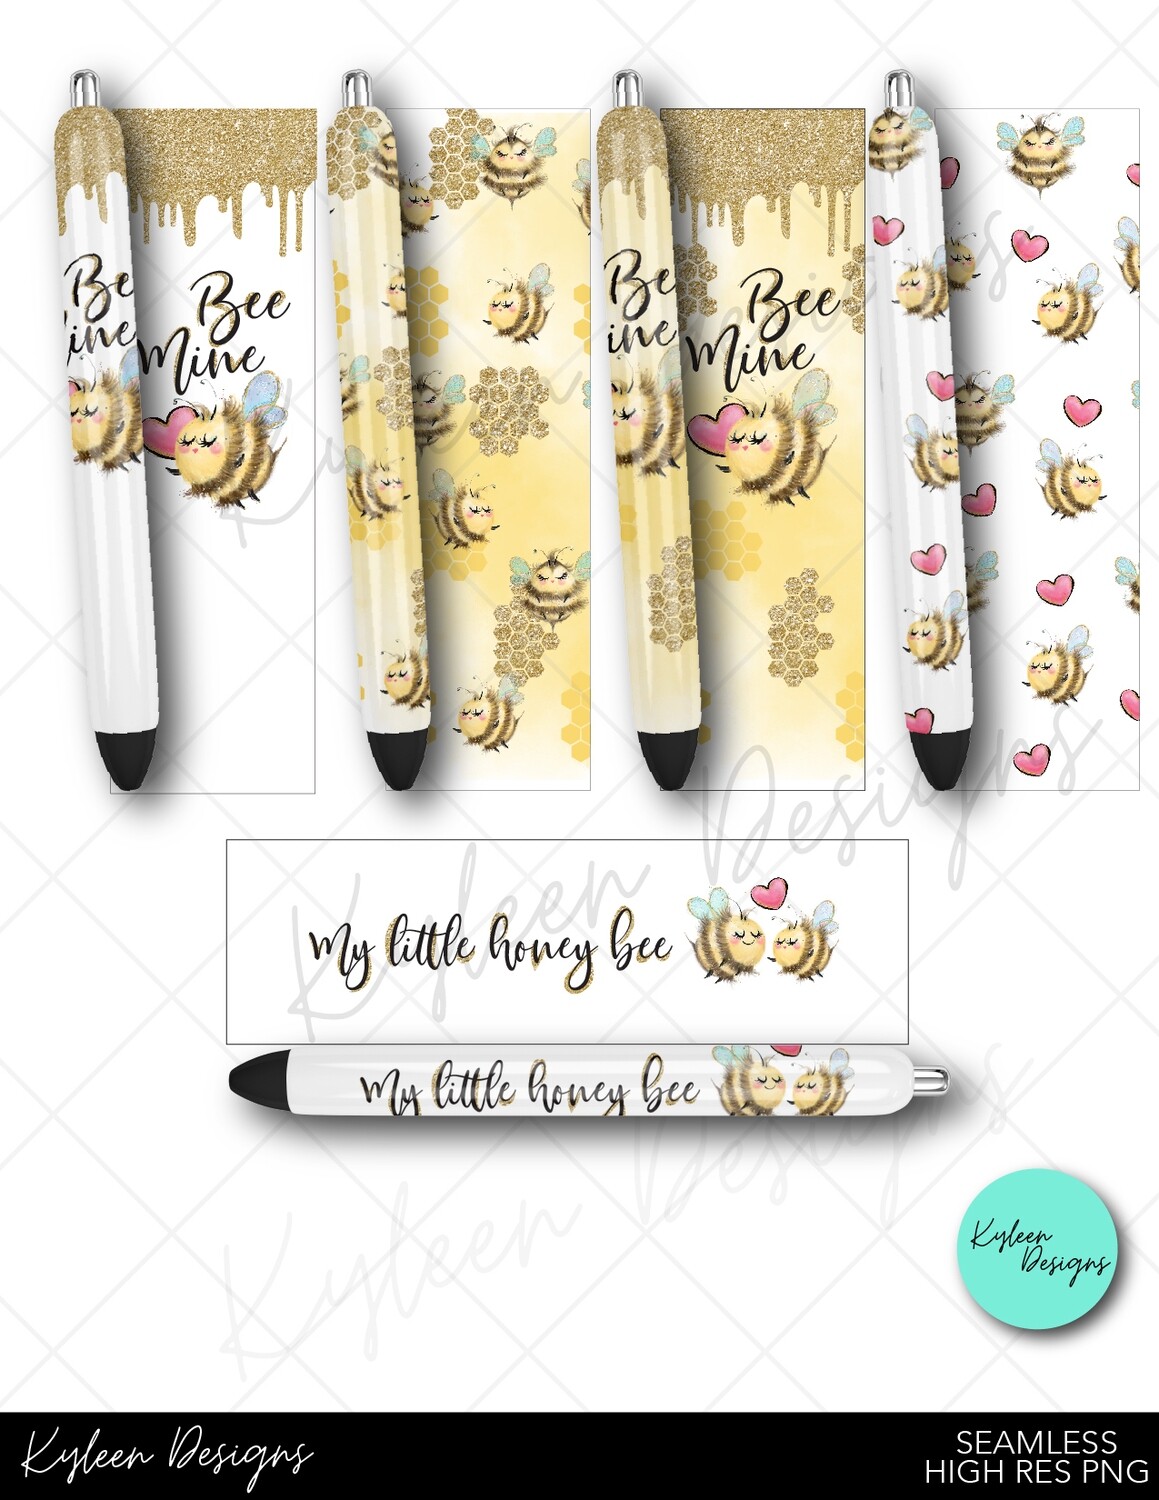 Bee mine pen wrappers™  for waterslide High Res PNG file